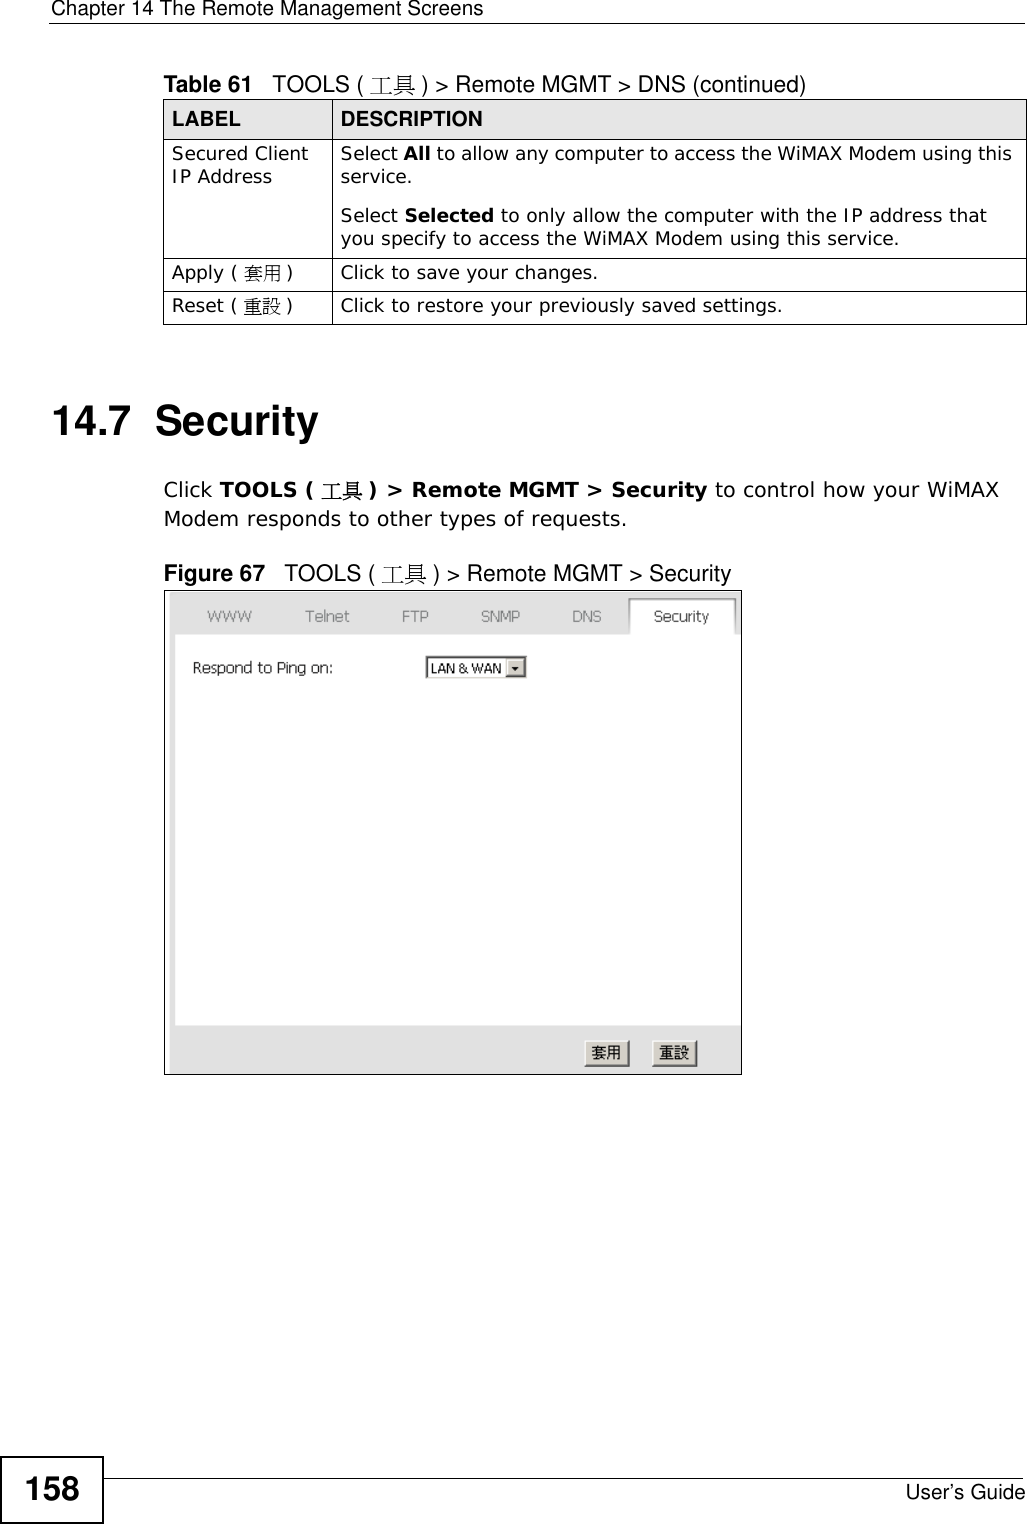 Chapter 14 The Remote Management ScreensUser’s Guide15814.7  SecurityClick TOOLS ( 工具 ) &gt; Remote MGMT &gt; Security to control how your WiMAX Modem responds to other types of requests.Figure 67   TOOLS ( 工具 ) &gt; Remote MGMT &gt; SecuritySecured Client IP Address Select All to allow any computer to access the WiMAX Modem using this service.Select Selected to only allow the computer with the IP address that you specify to access the WiMAX Modem using this service.Apply ( 套用 )Click to save your changes.Reset ( 重設 )Click to restore your previously saved settings.Table 61   TOOLS ( 工具 ) &gt; Remote MGMT &gt; DNS (continued)LABEL DESCRIPTION